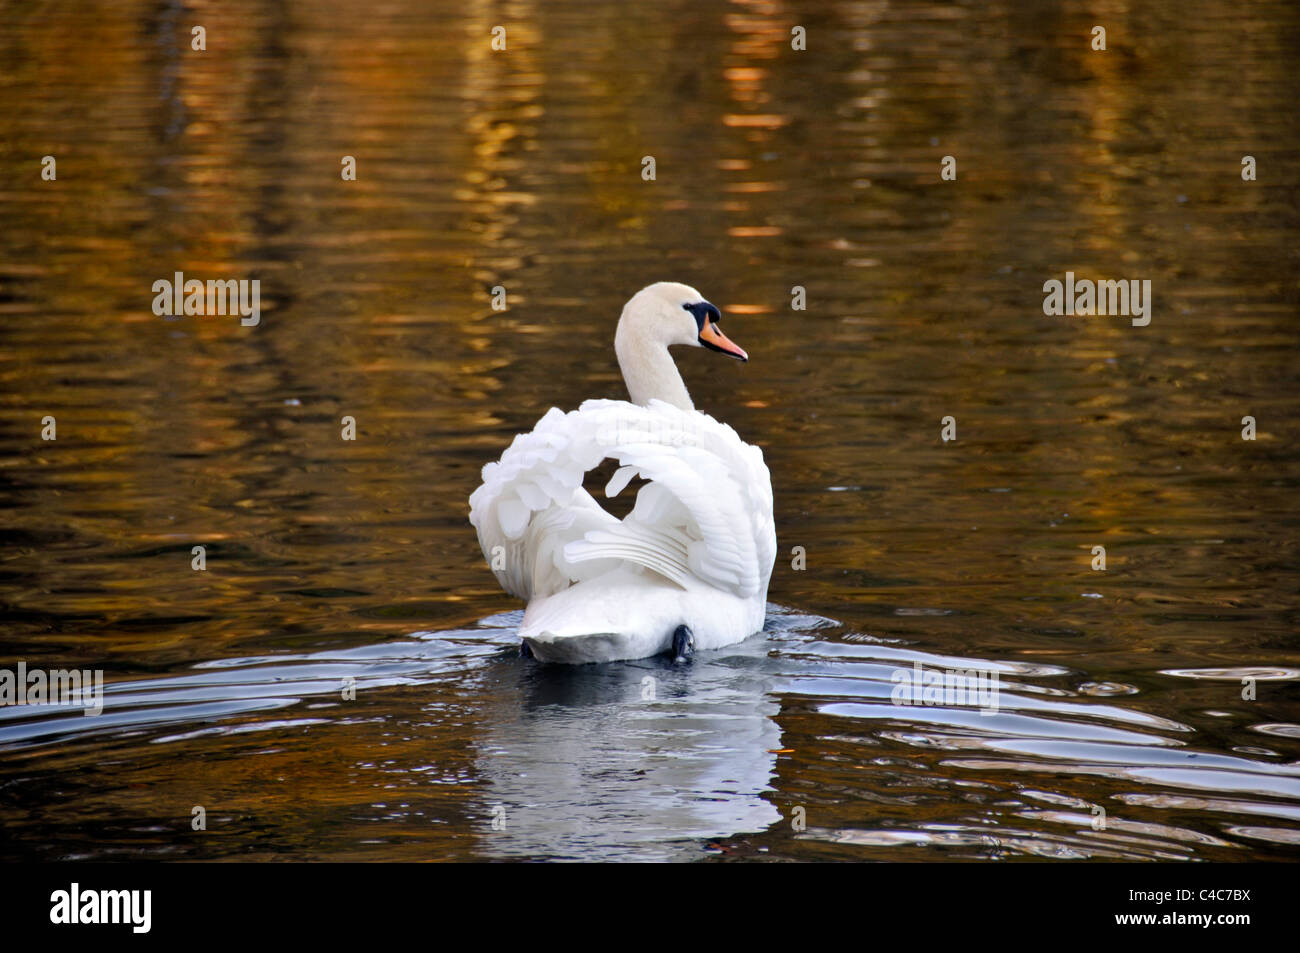 Swan with angel wings swimming away from camera with Autumn reflections on water Stock Photo